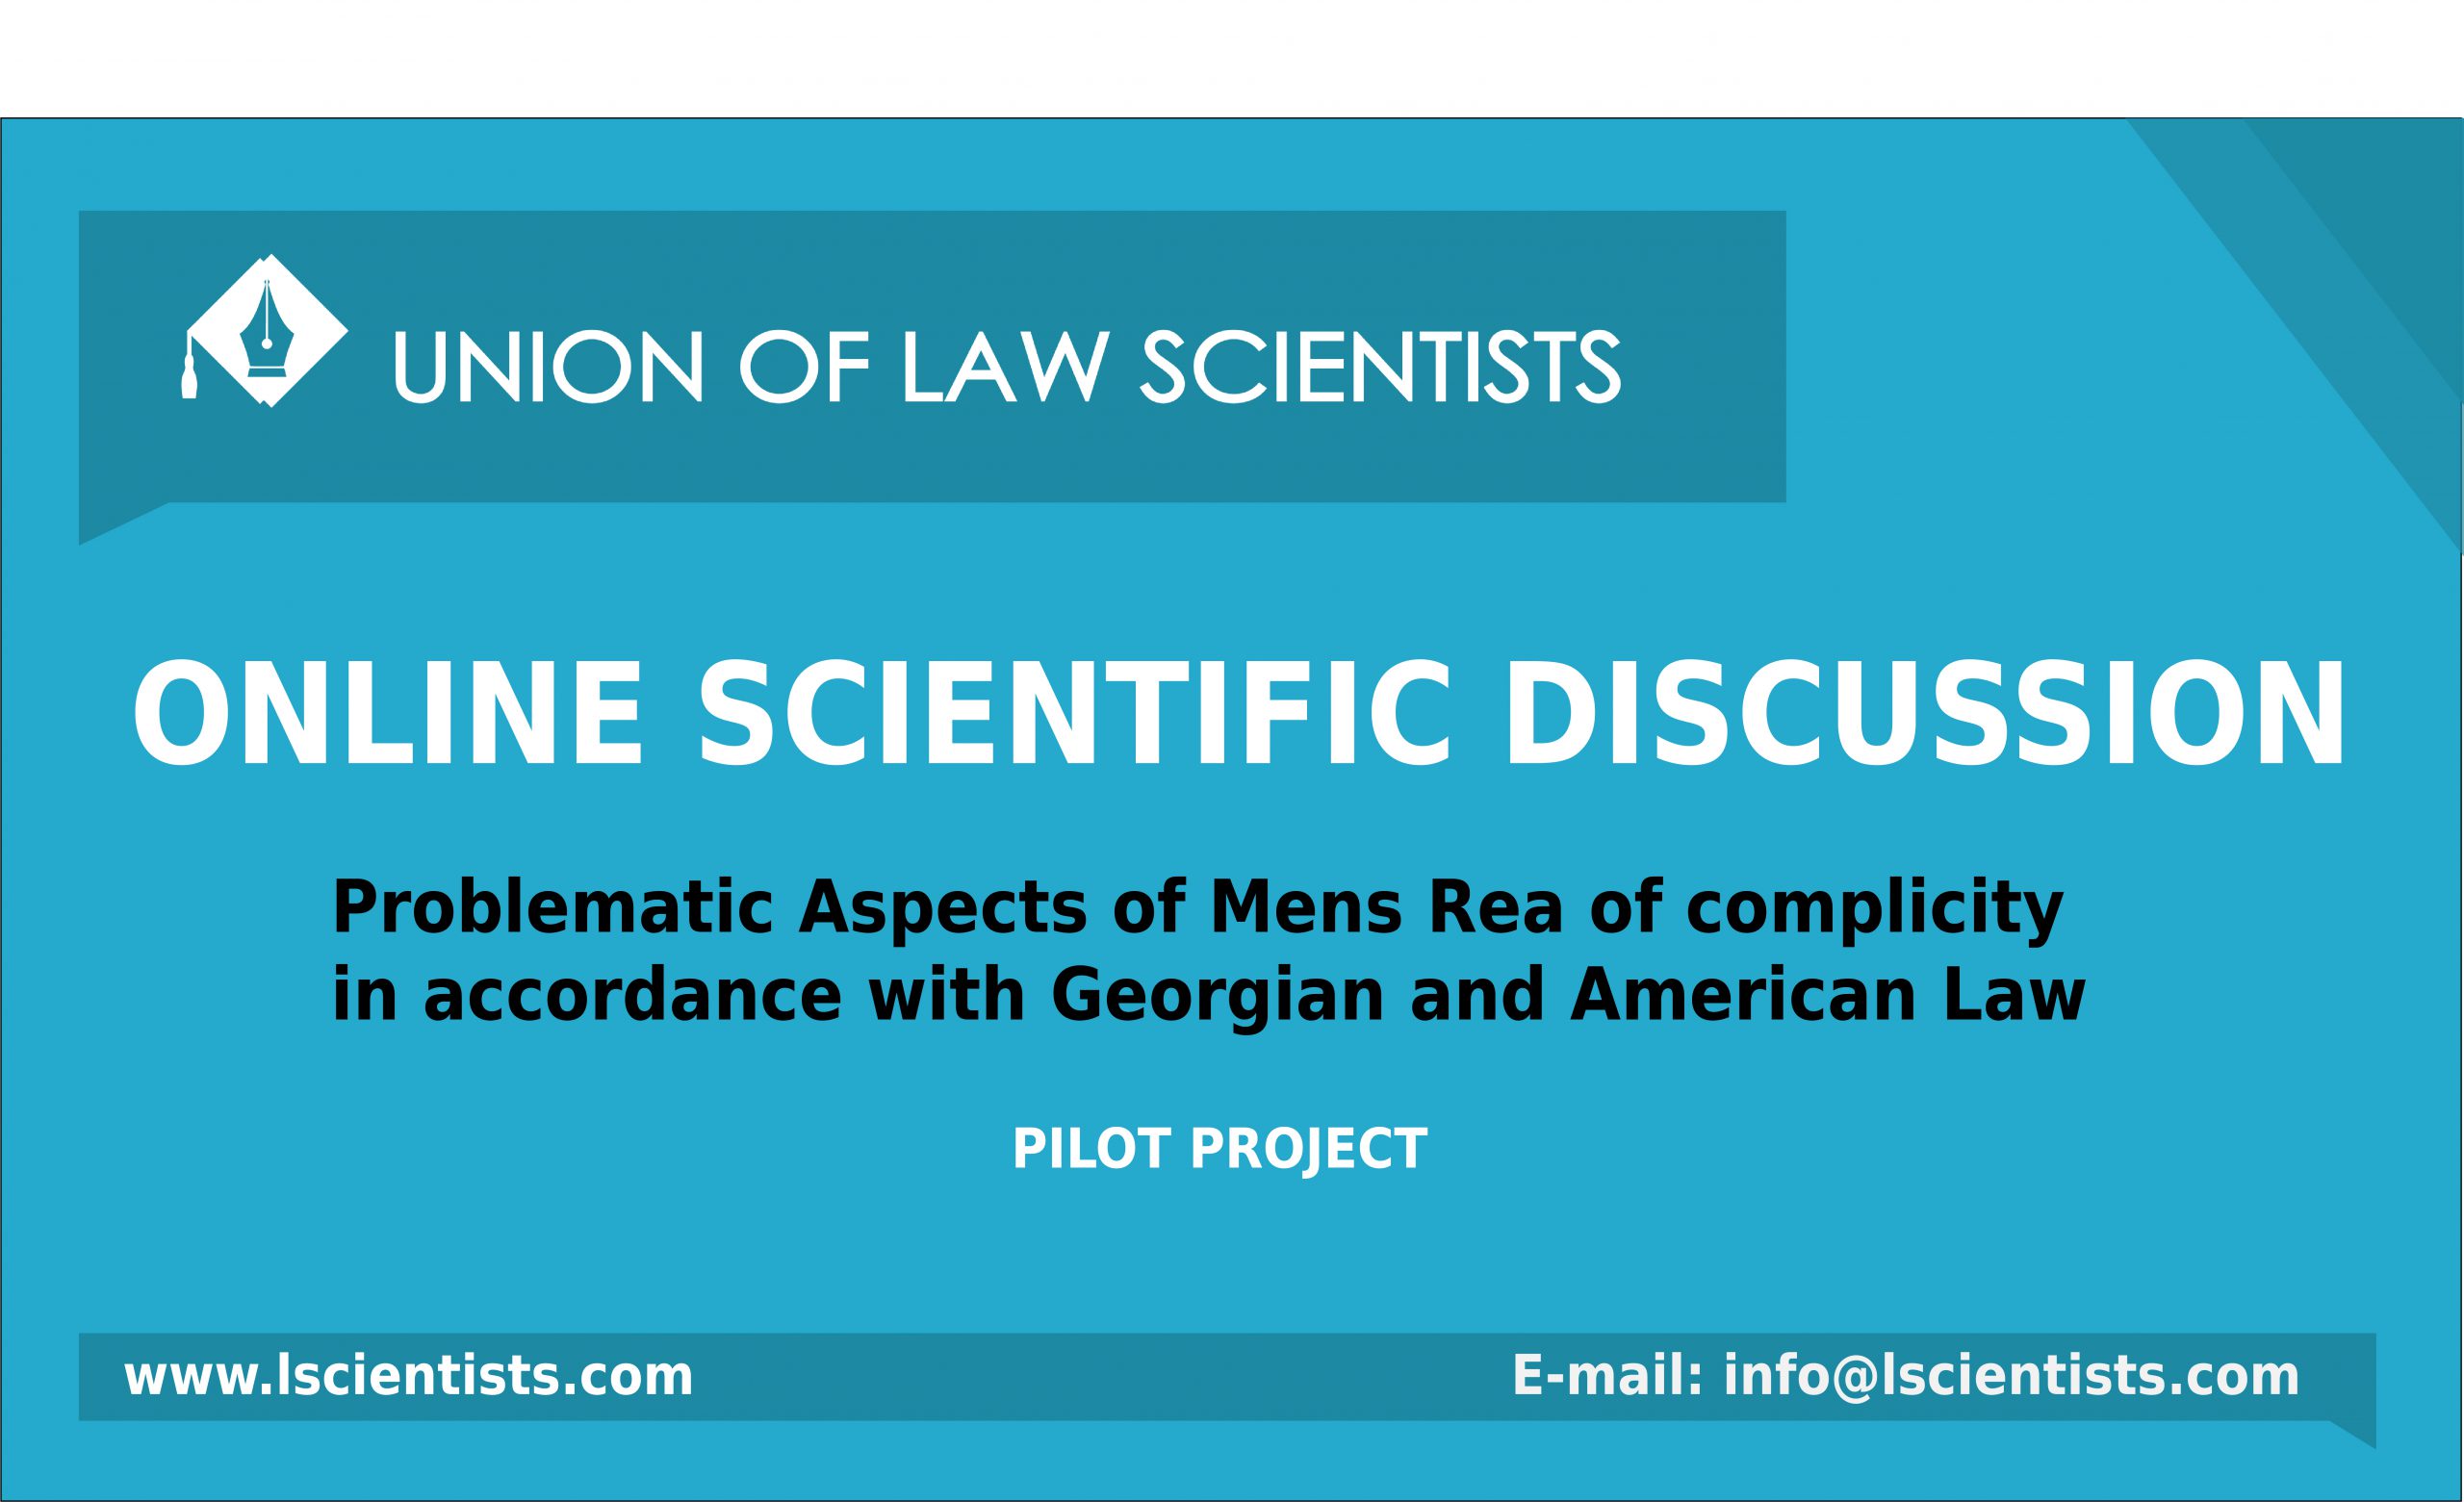 First event will be held in the frames of the pilot project “Online Scientific Discussions”